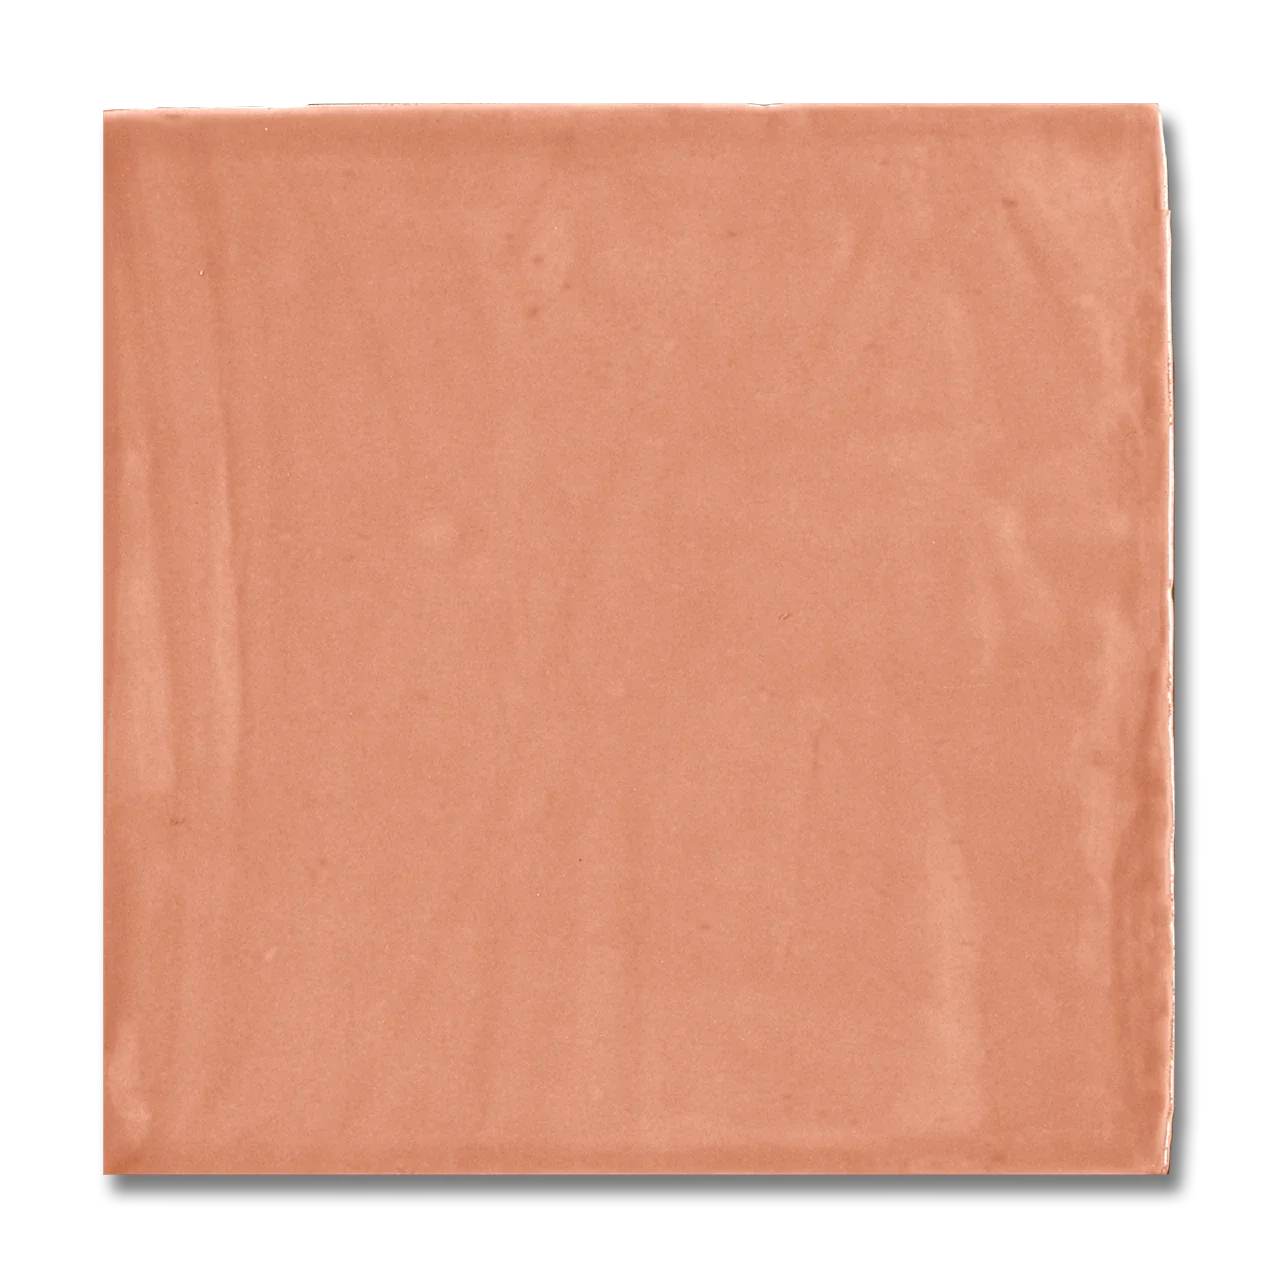 St. Topez Glazed Ceramic Wall Tile 5”x5” Coral